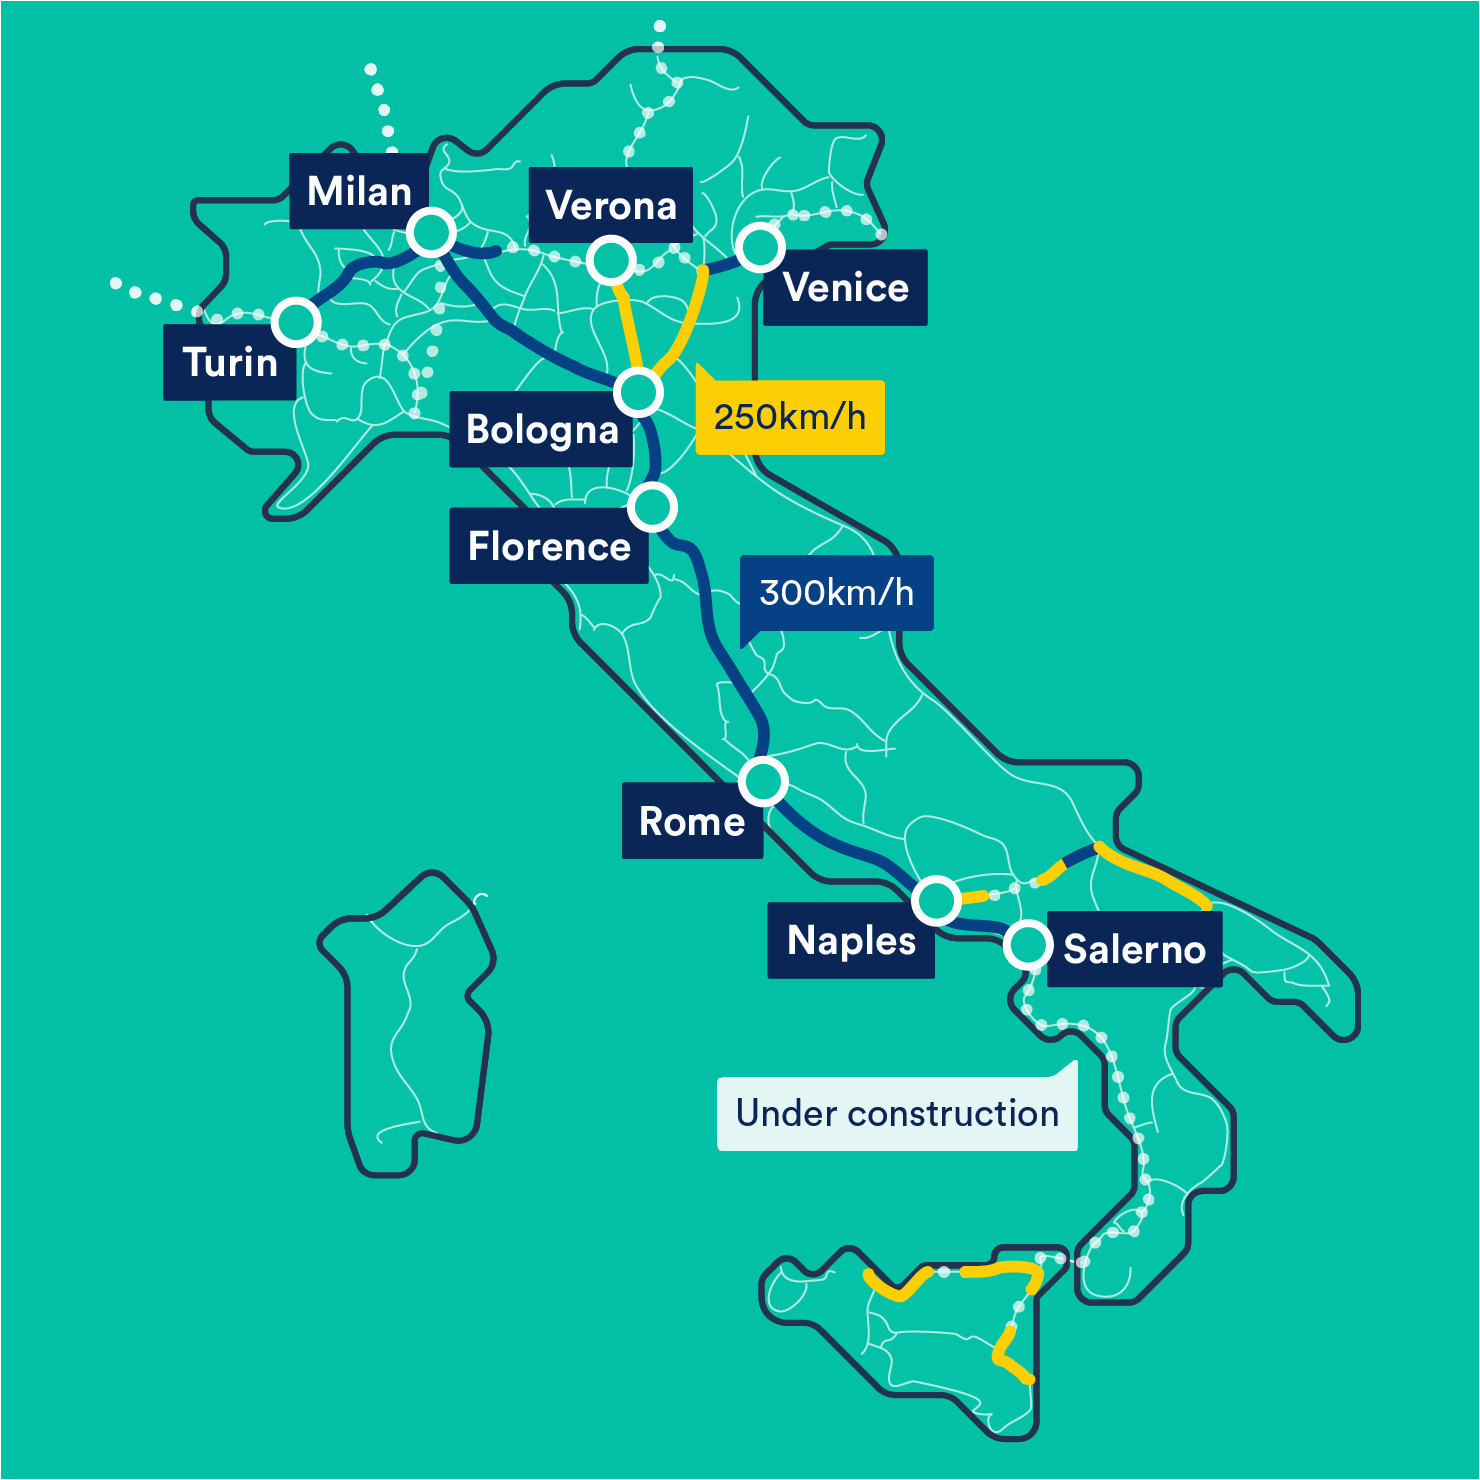 trenitalia map with train descriptions and links to purchasing